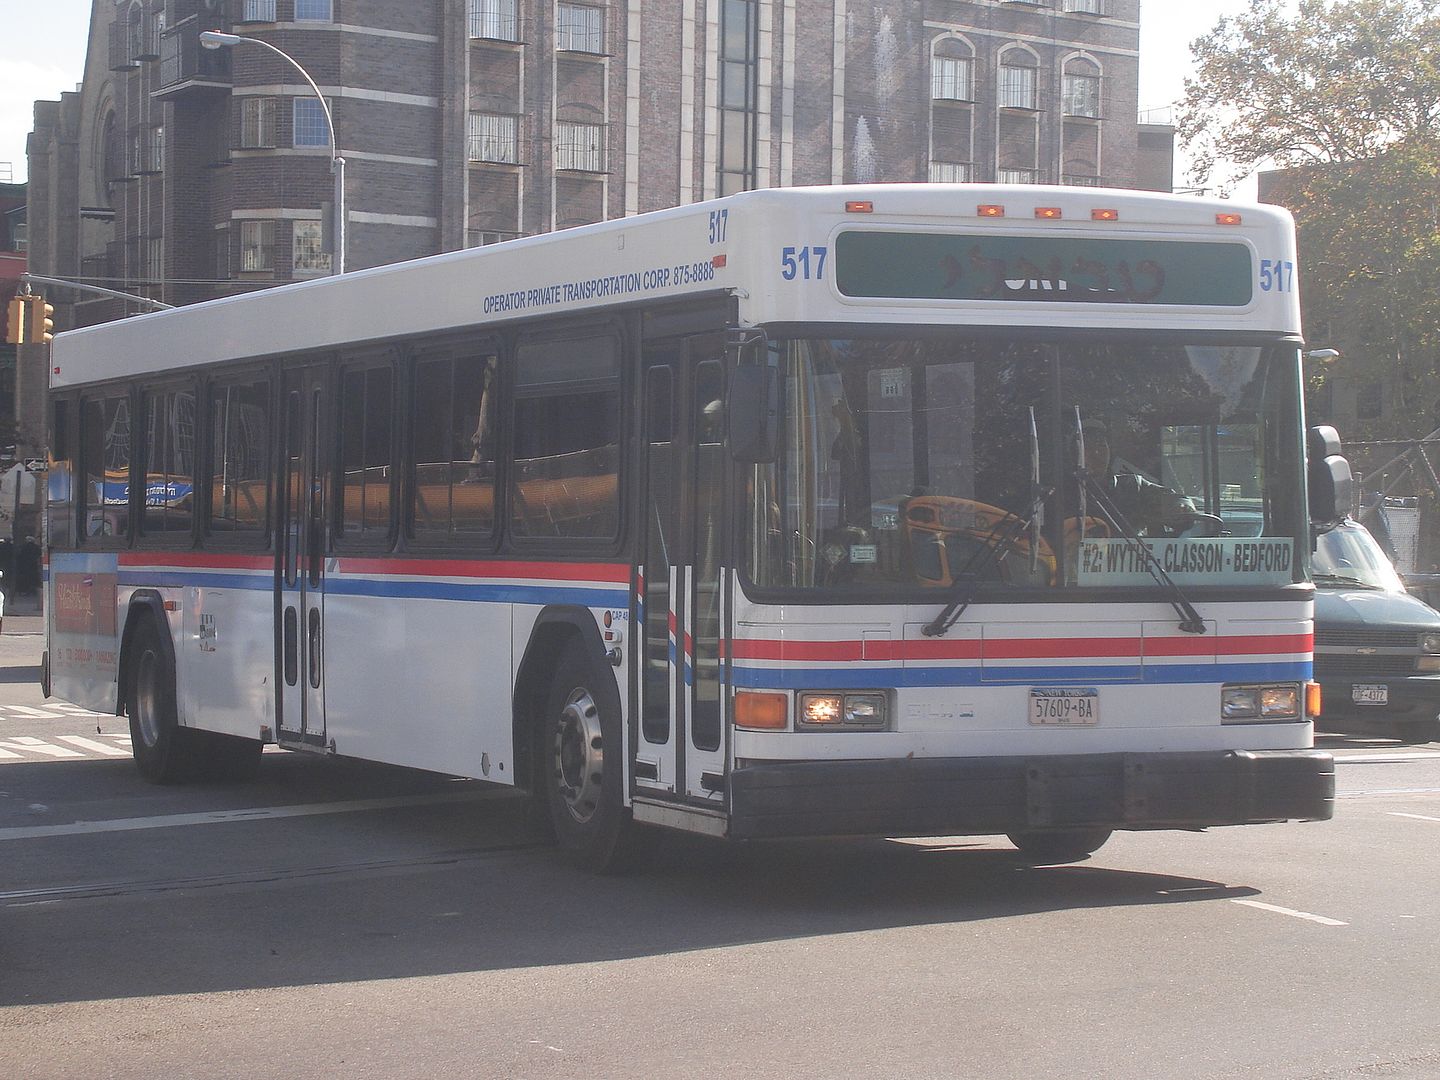 Williamsburg Trolley 517, Gillig low floor on 2(Operated by Private Transportation)